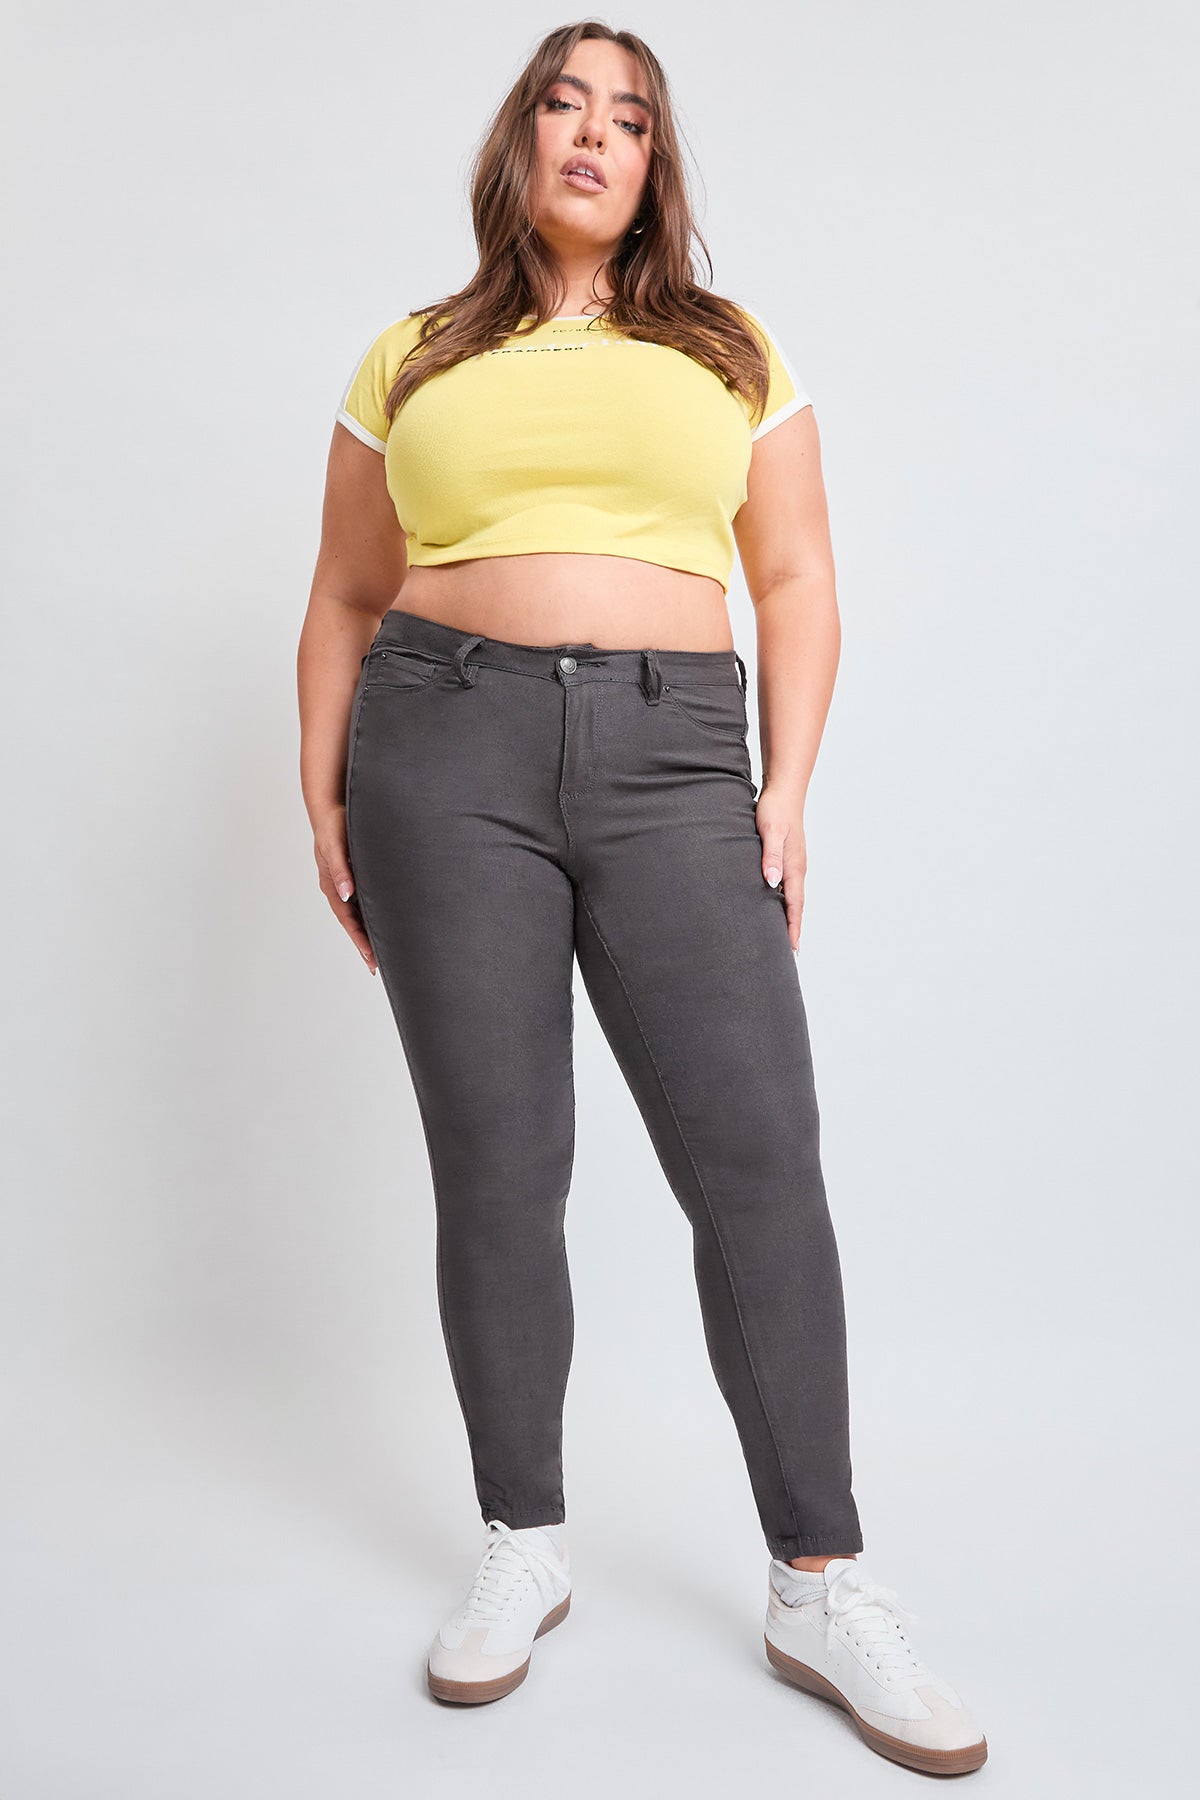 Plus Size Women's Hyperstretch Forever Color Mid Rise Pants